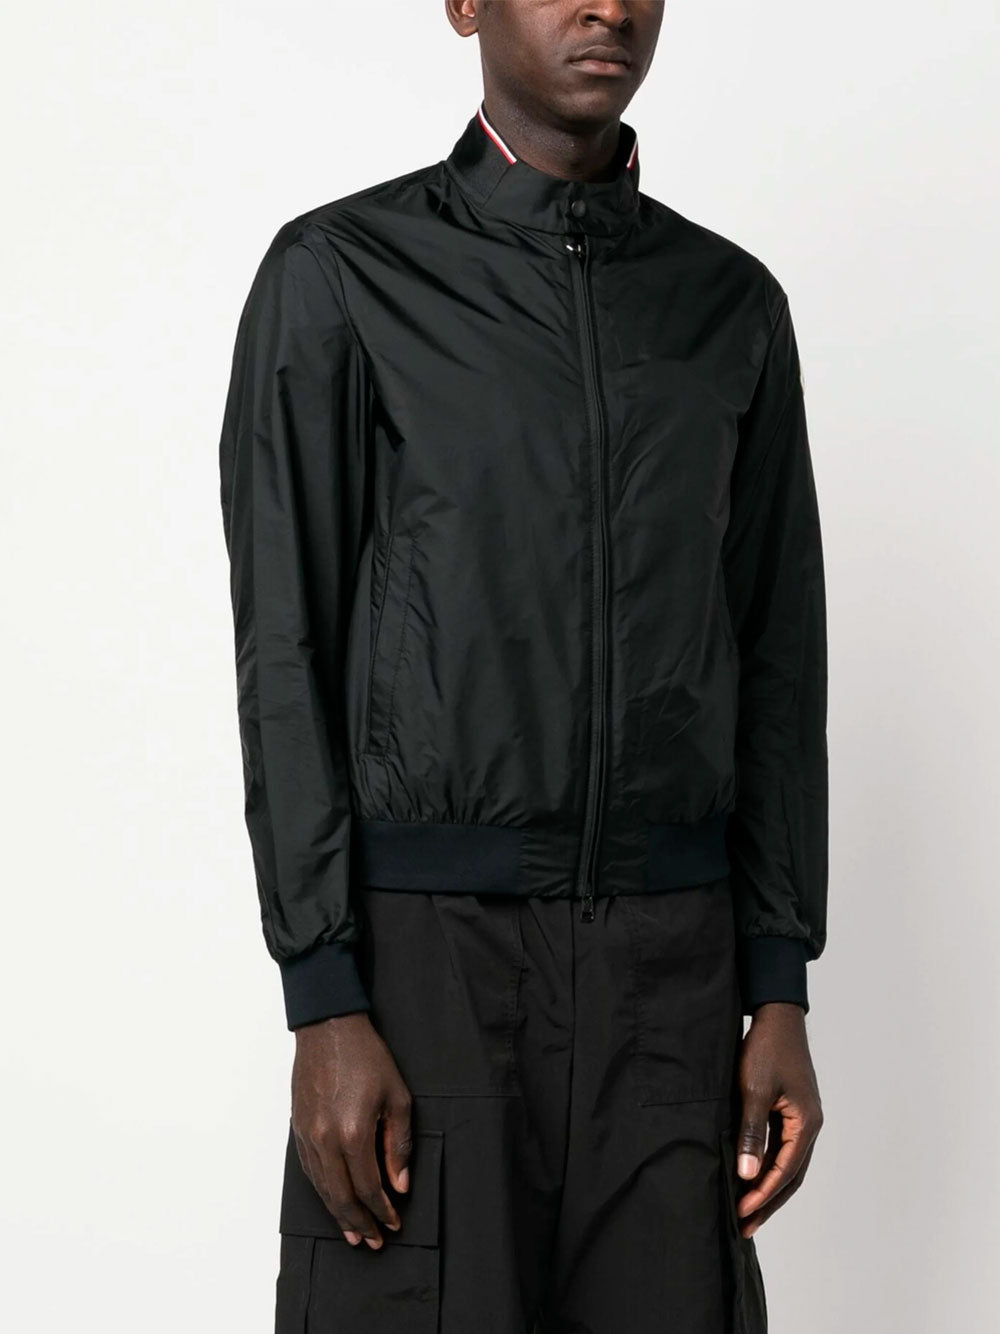 Reppe jacket